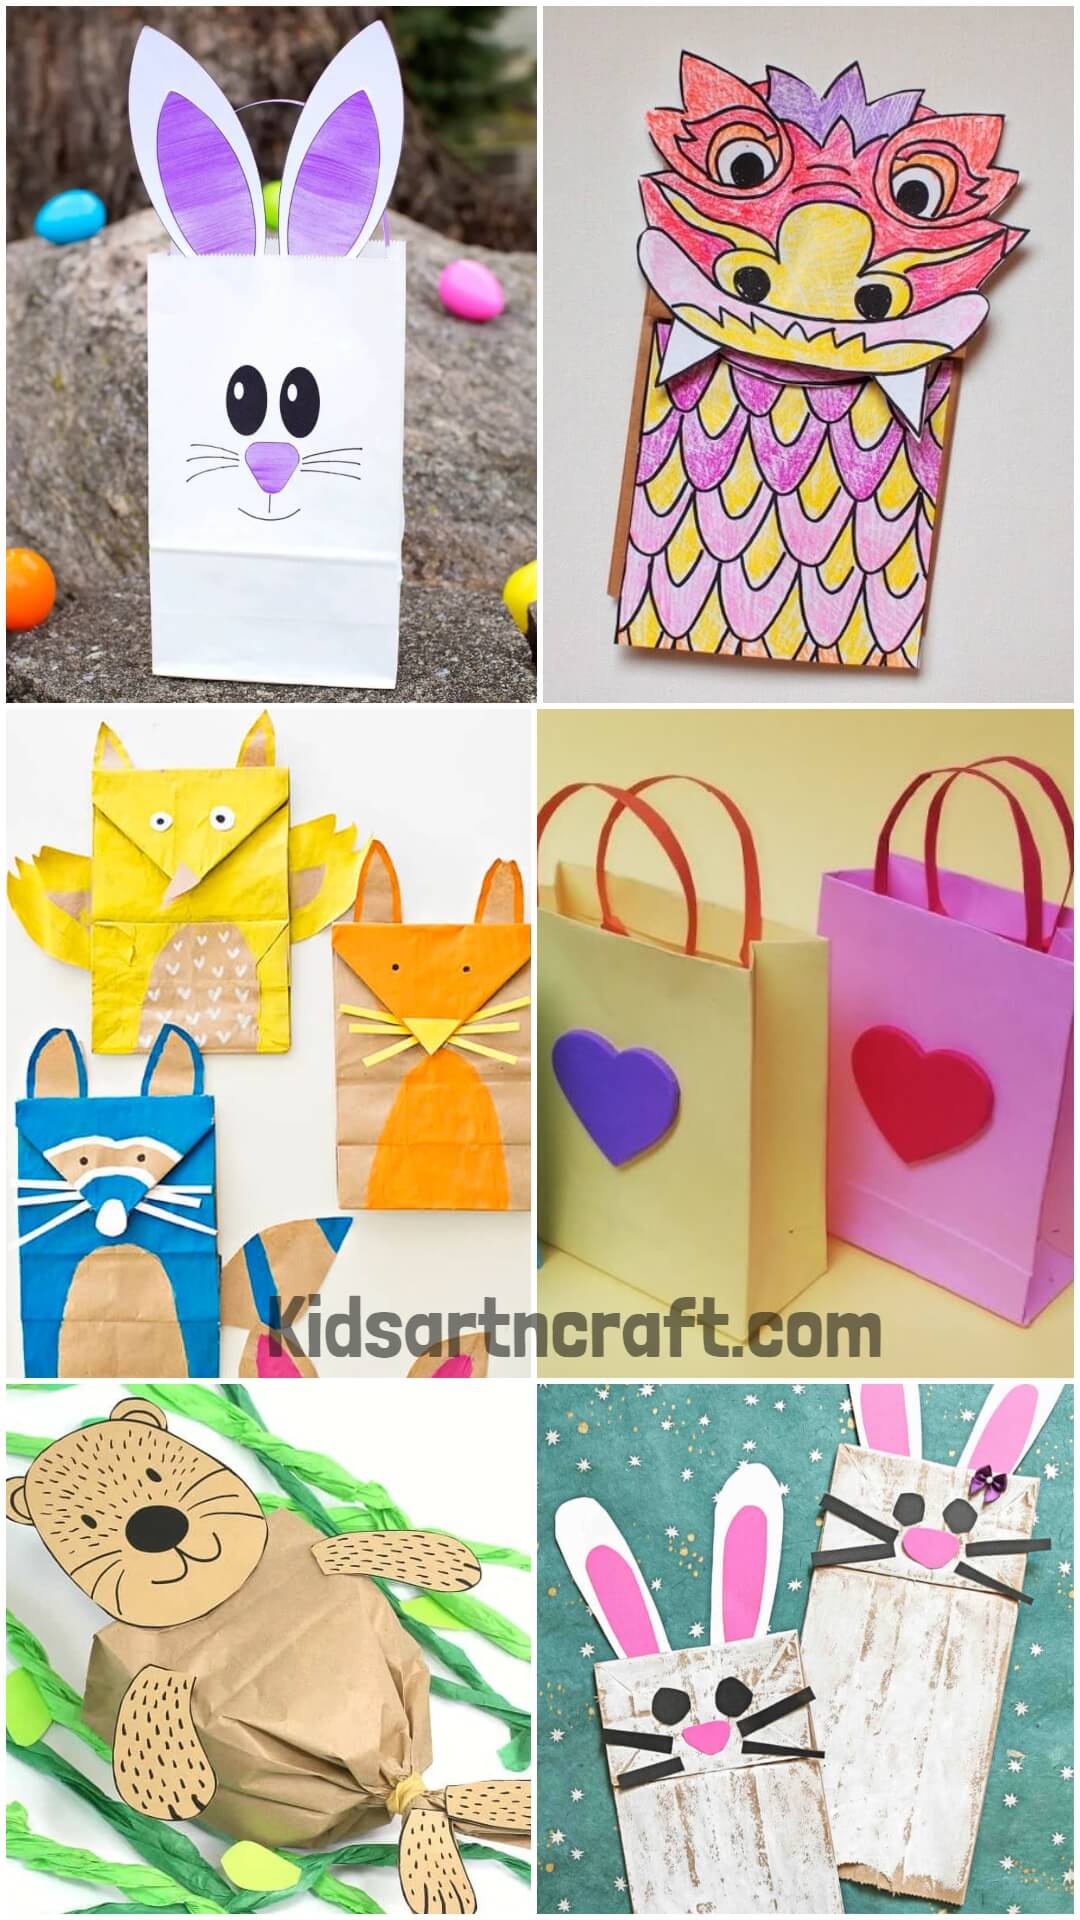 25 Simple Paper Bag Crafts for Kids and Adults - Blitsy